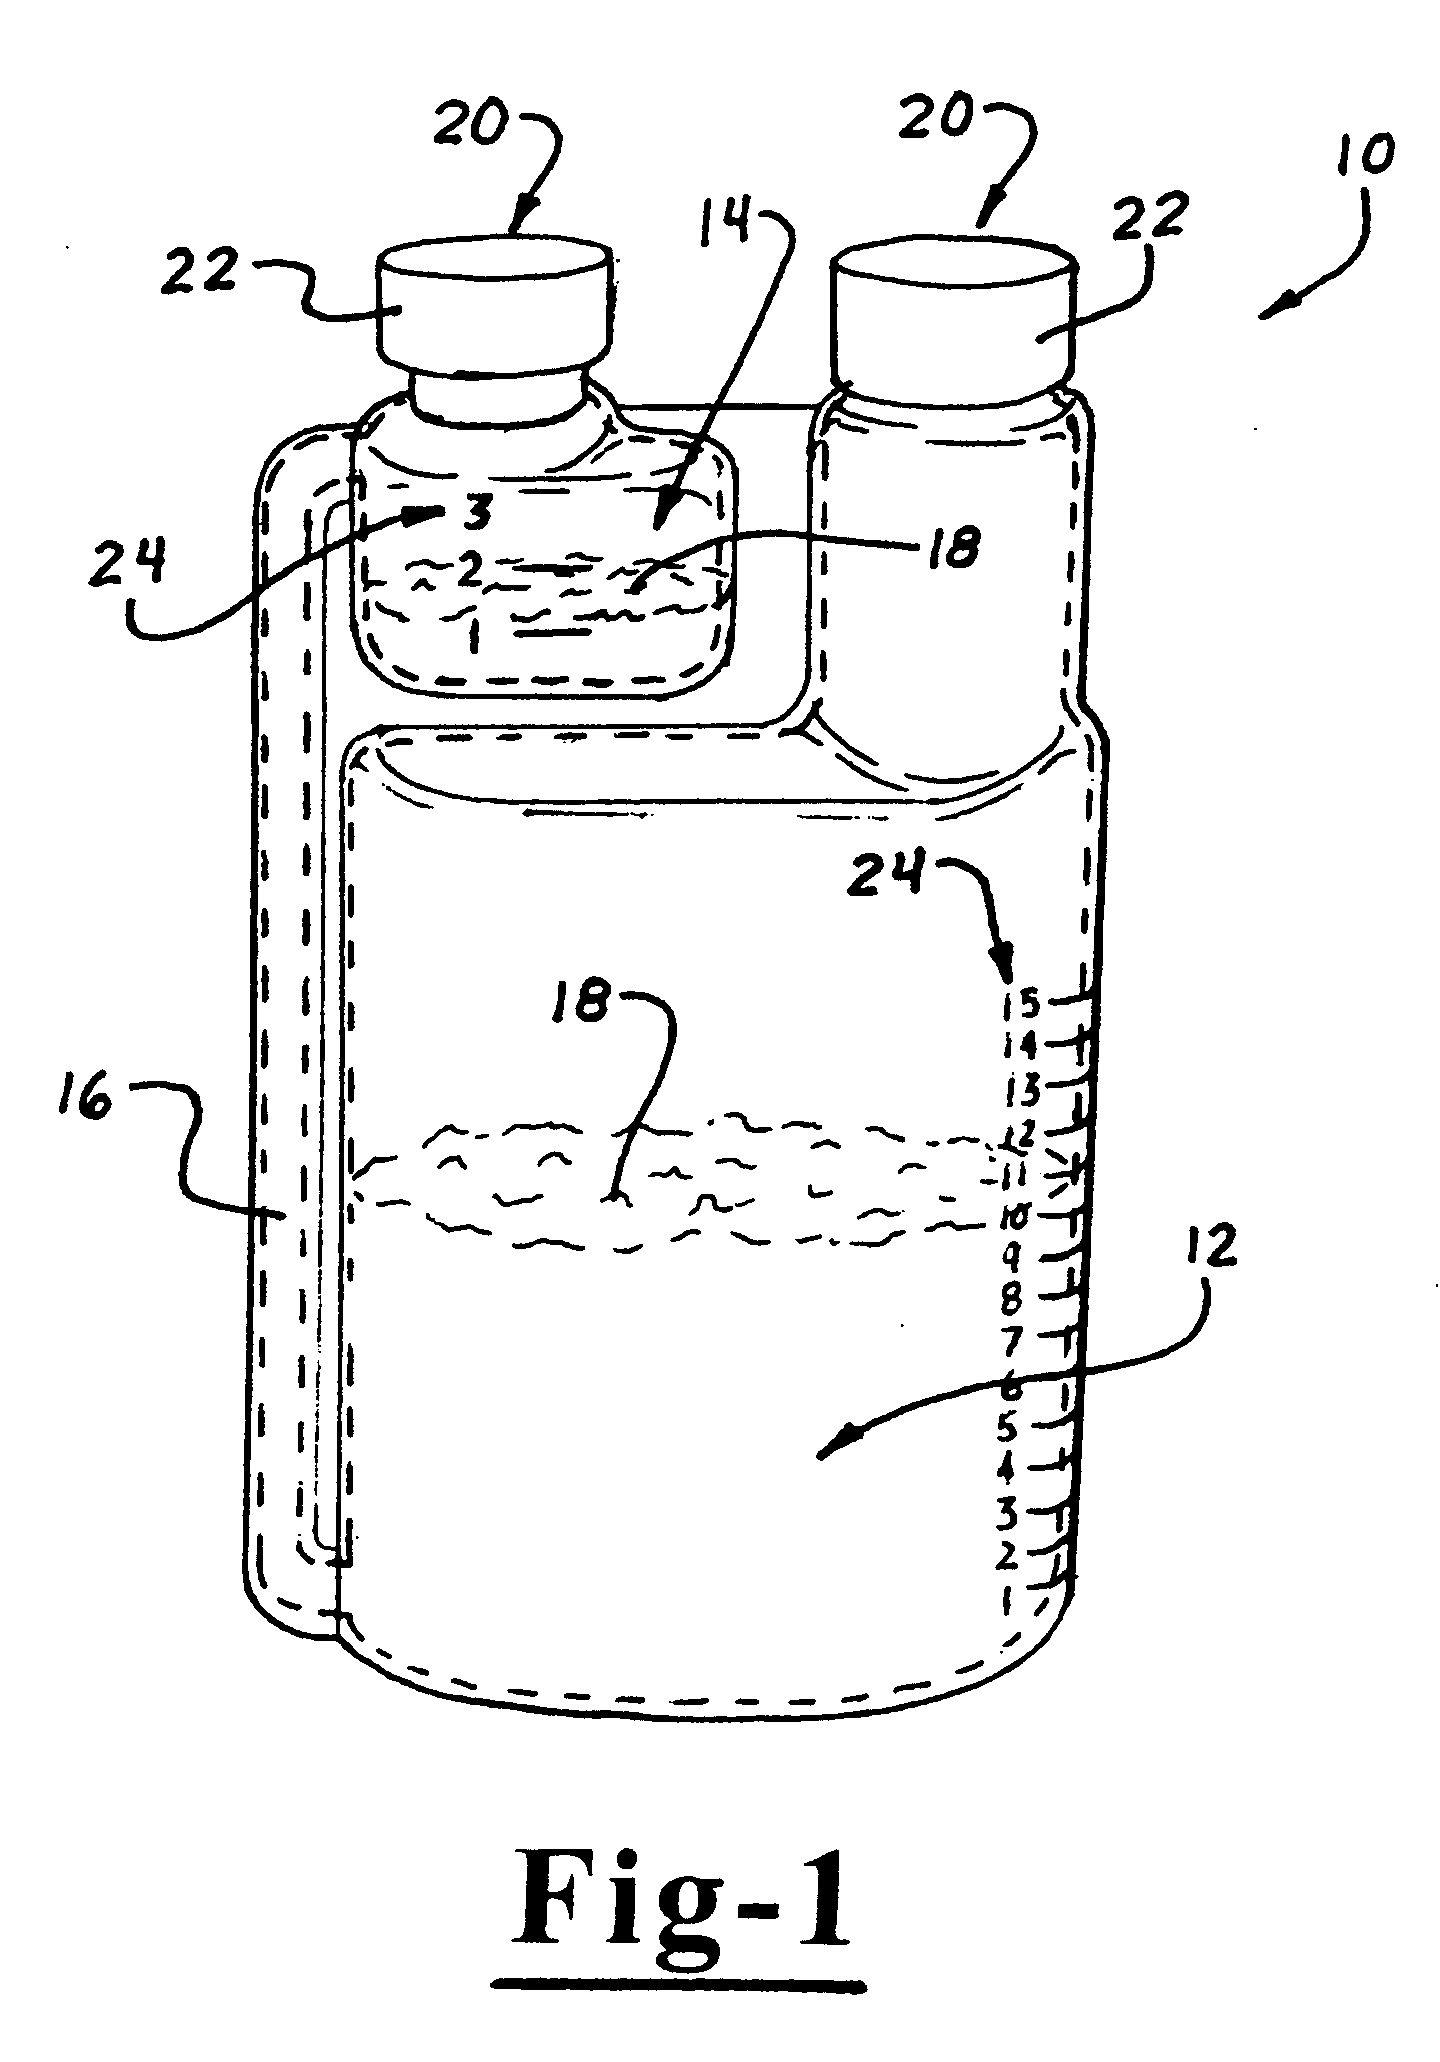 Hair product packaging and methods